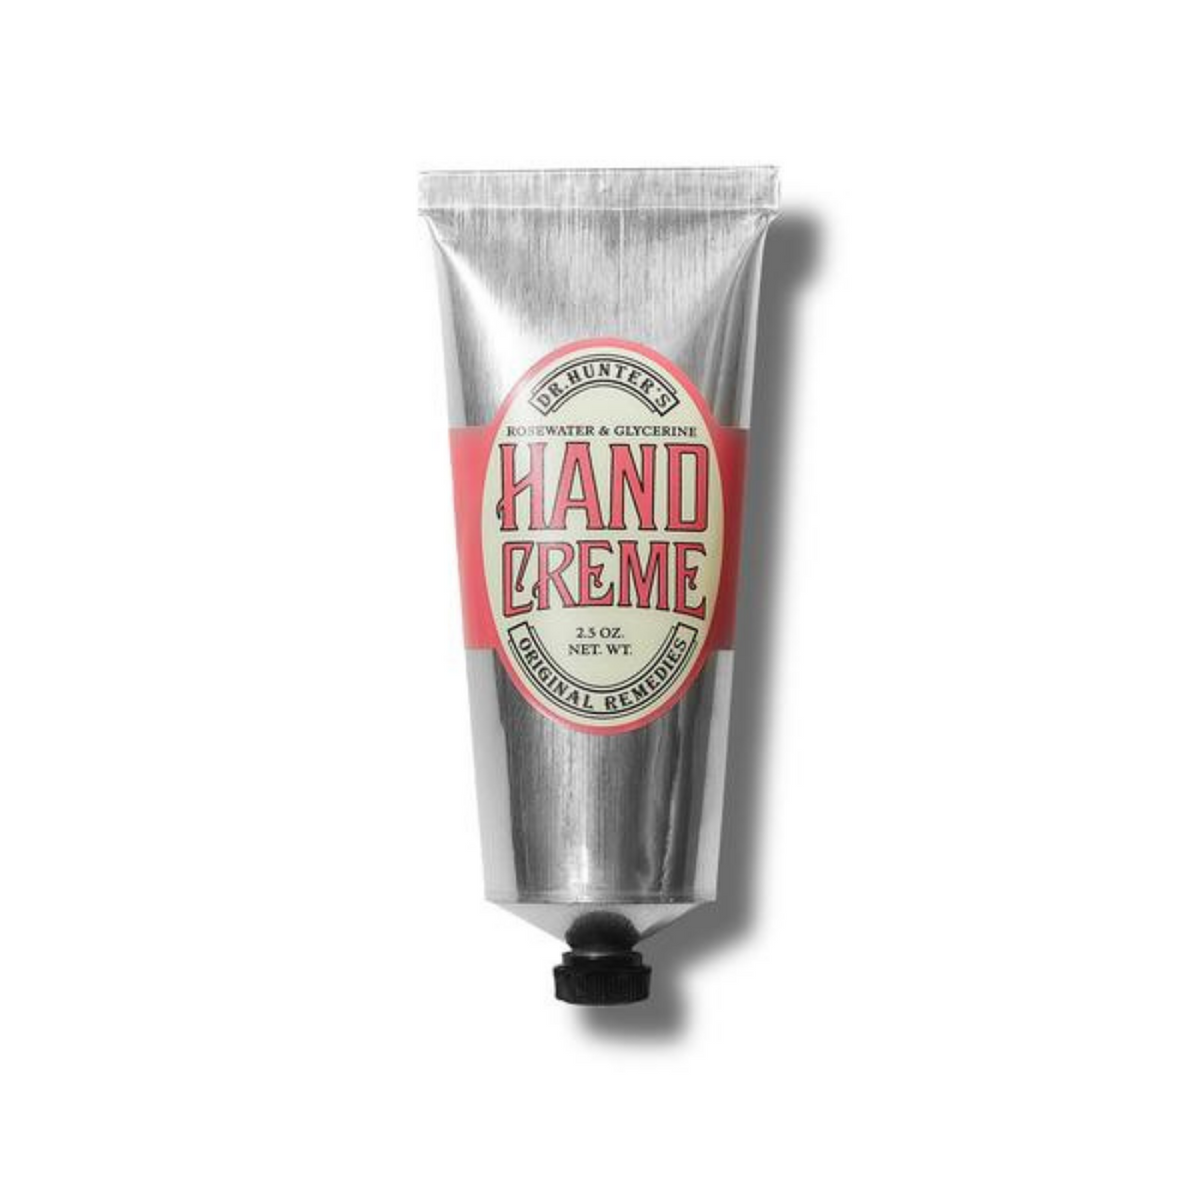 Primary image of Dr. Hunter's Hand Creme